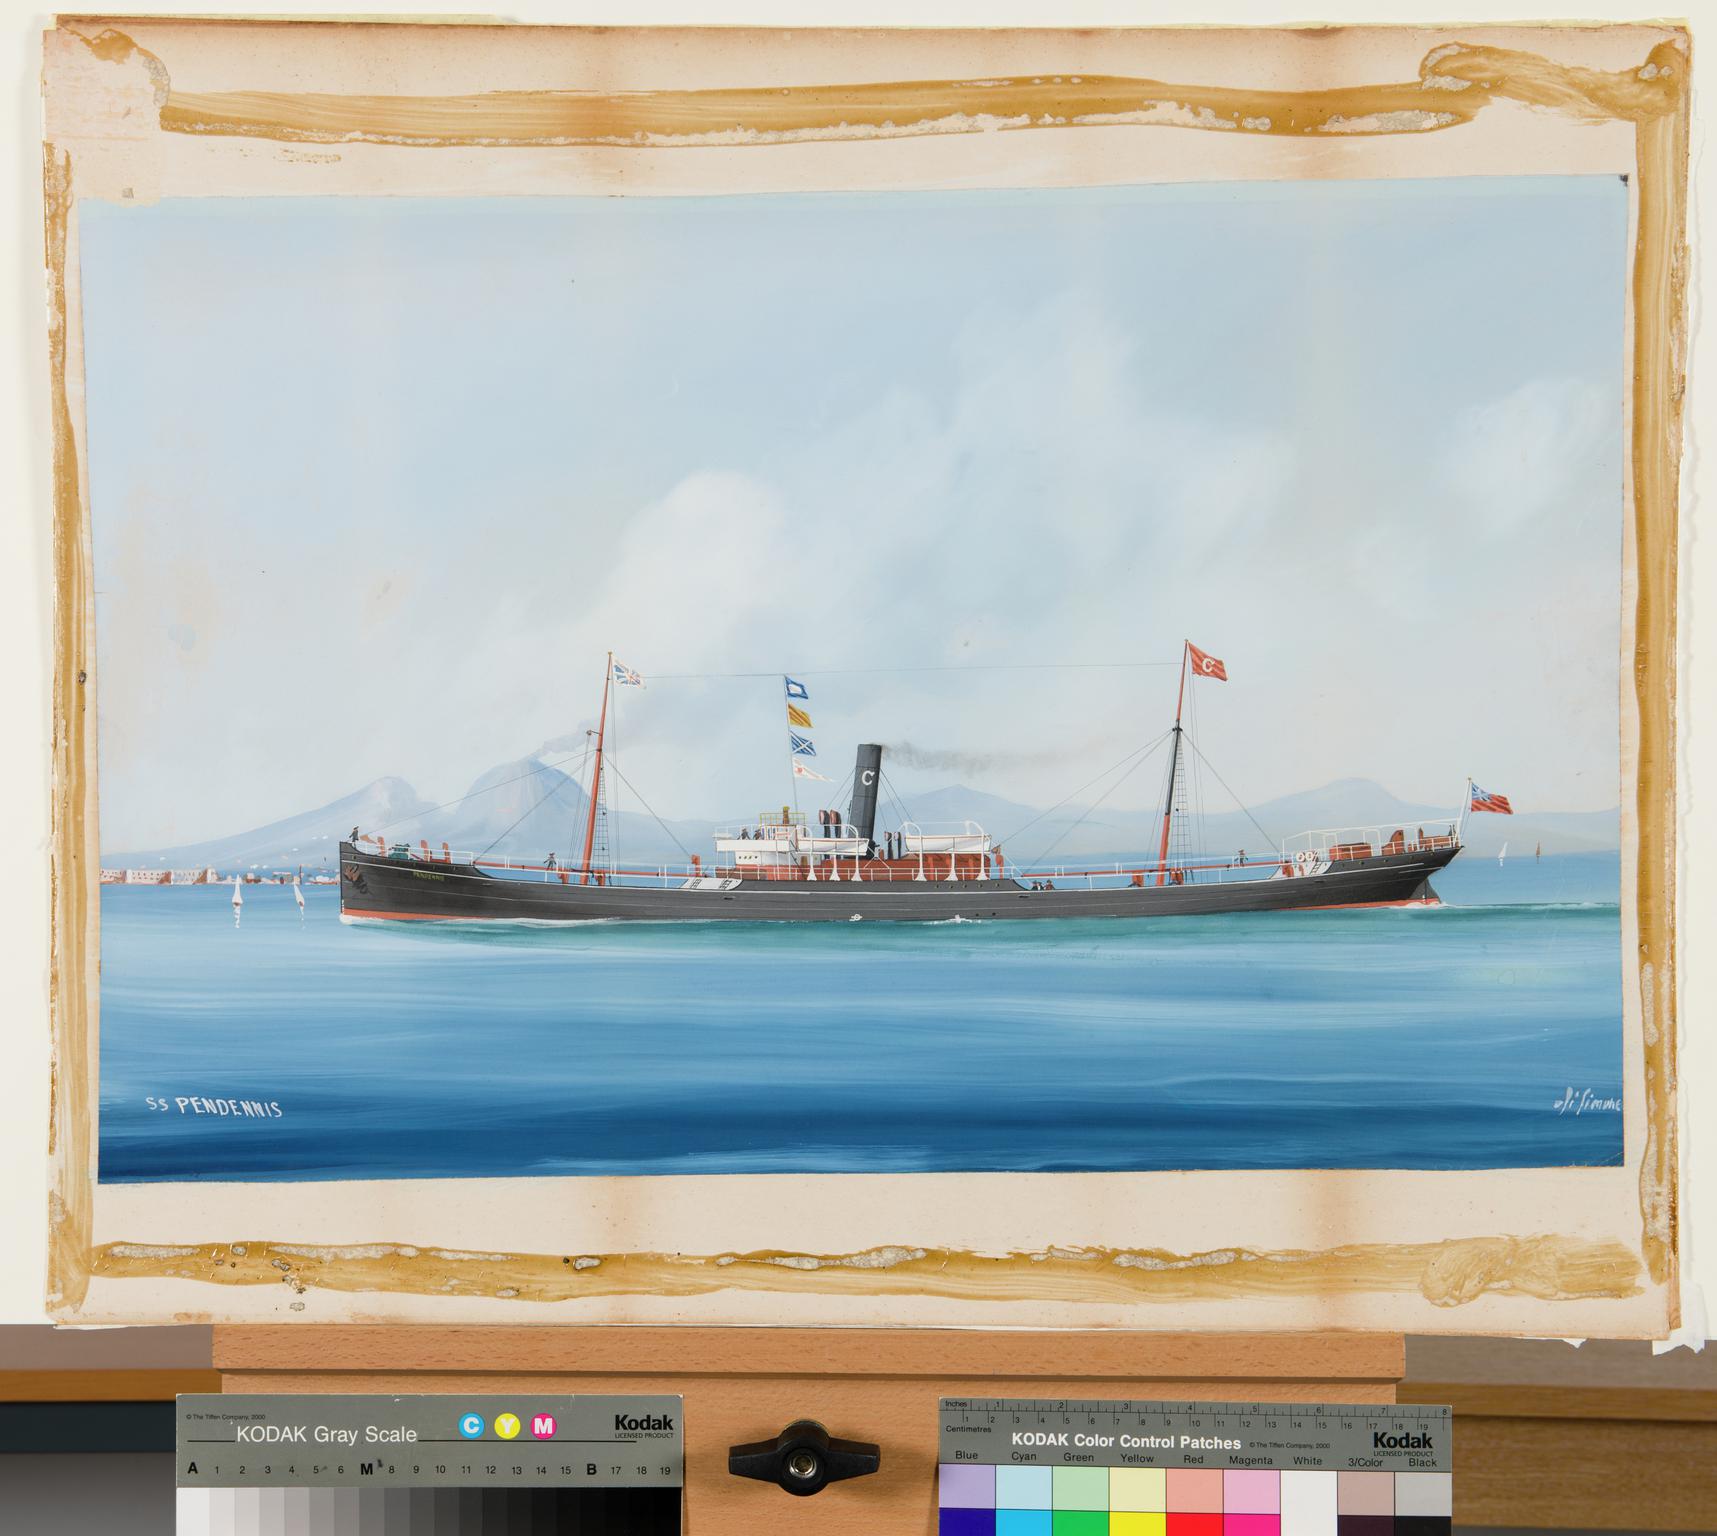 S.S. PENDENNIS (painting)